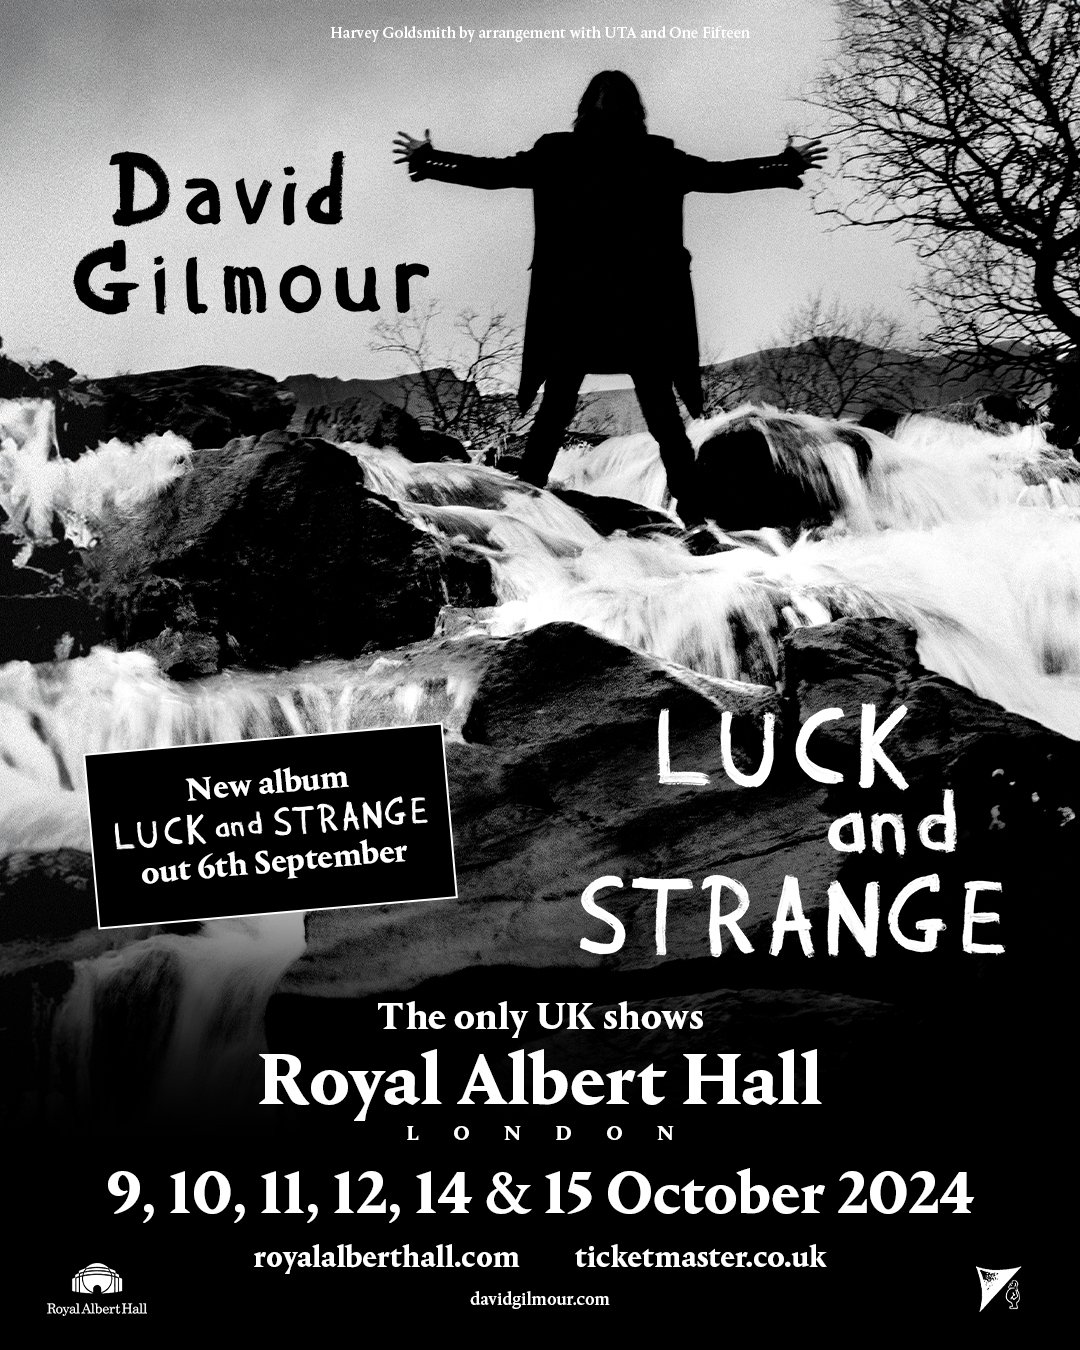 David Gilmour - Luck and Strange - The New Album - Out 6th September. The only UK shows Royal Albert Hall, London. 9th, 10th, 11th, 12th, 14th & 15th October 2024